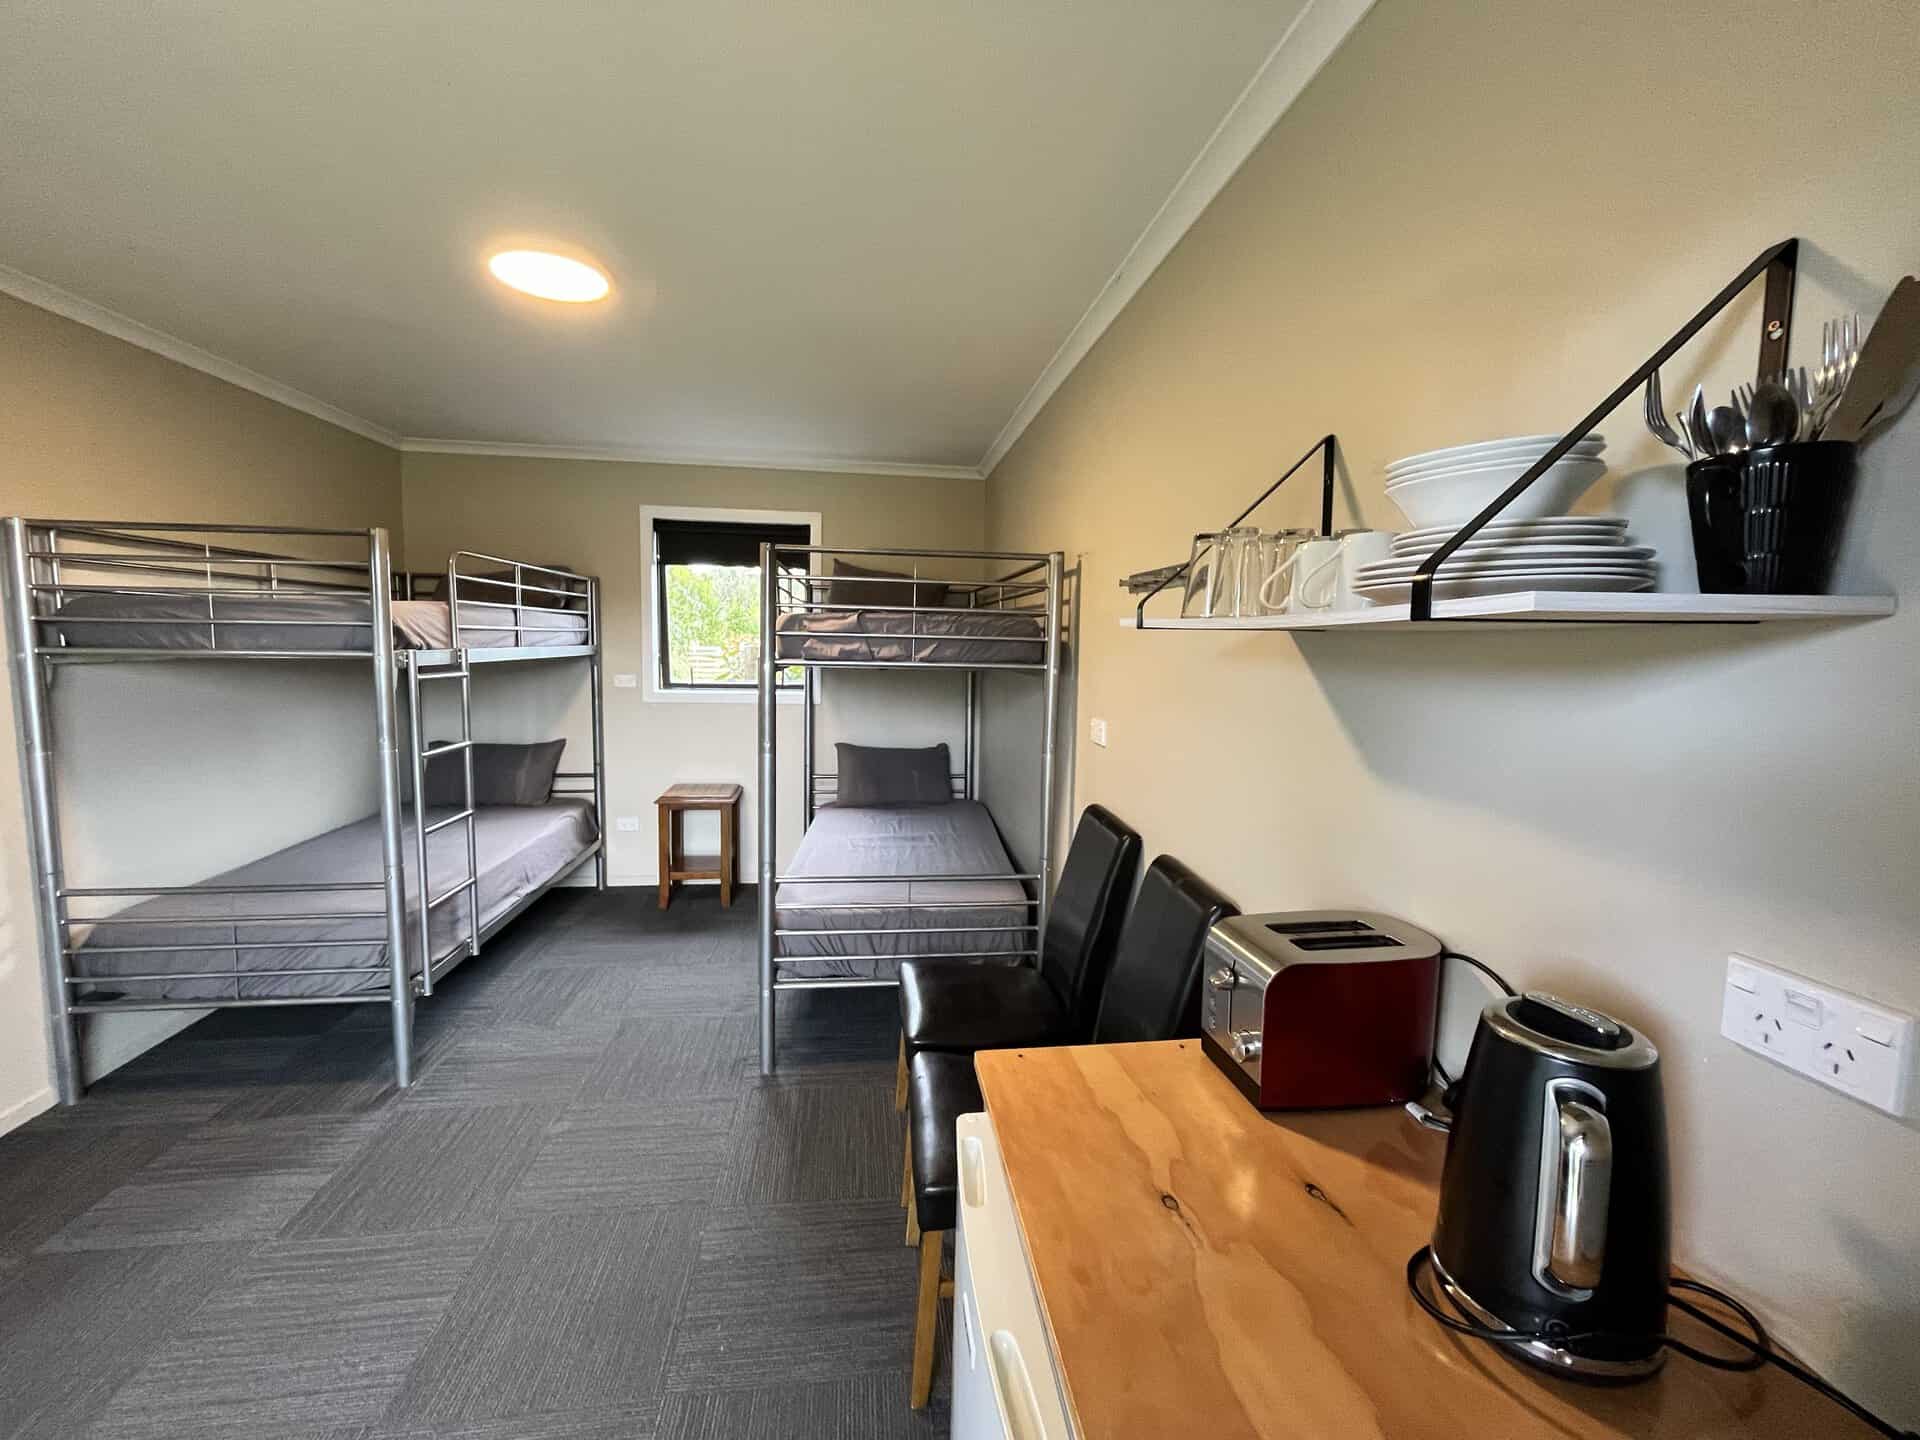 Tourist Bunk room showing 4 bunk beds and bench with toaster and jug